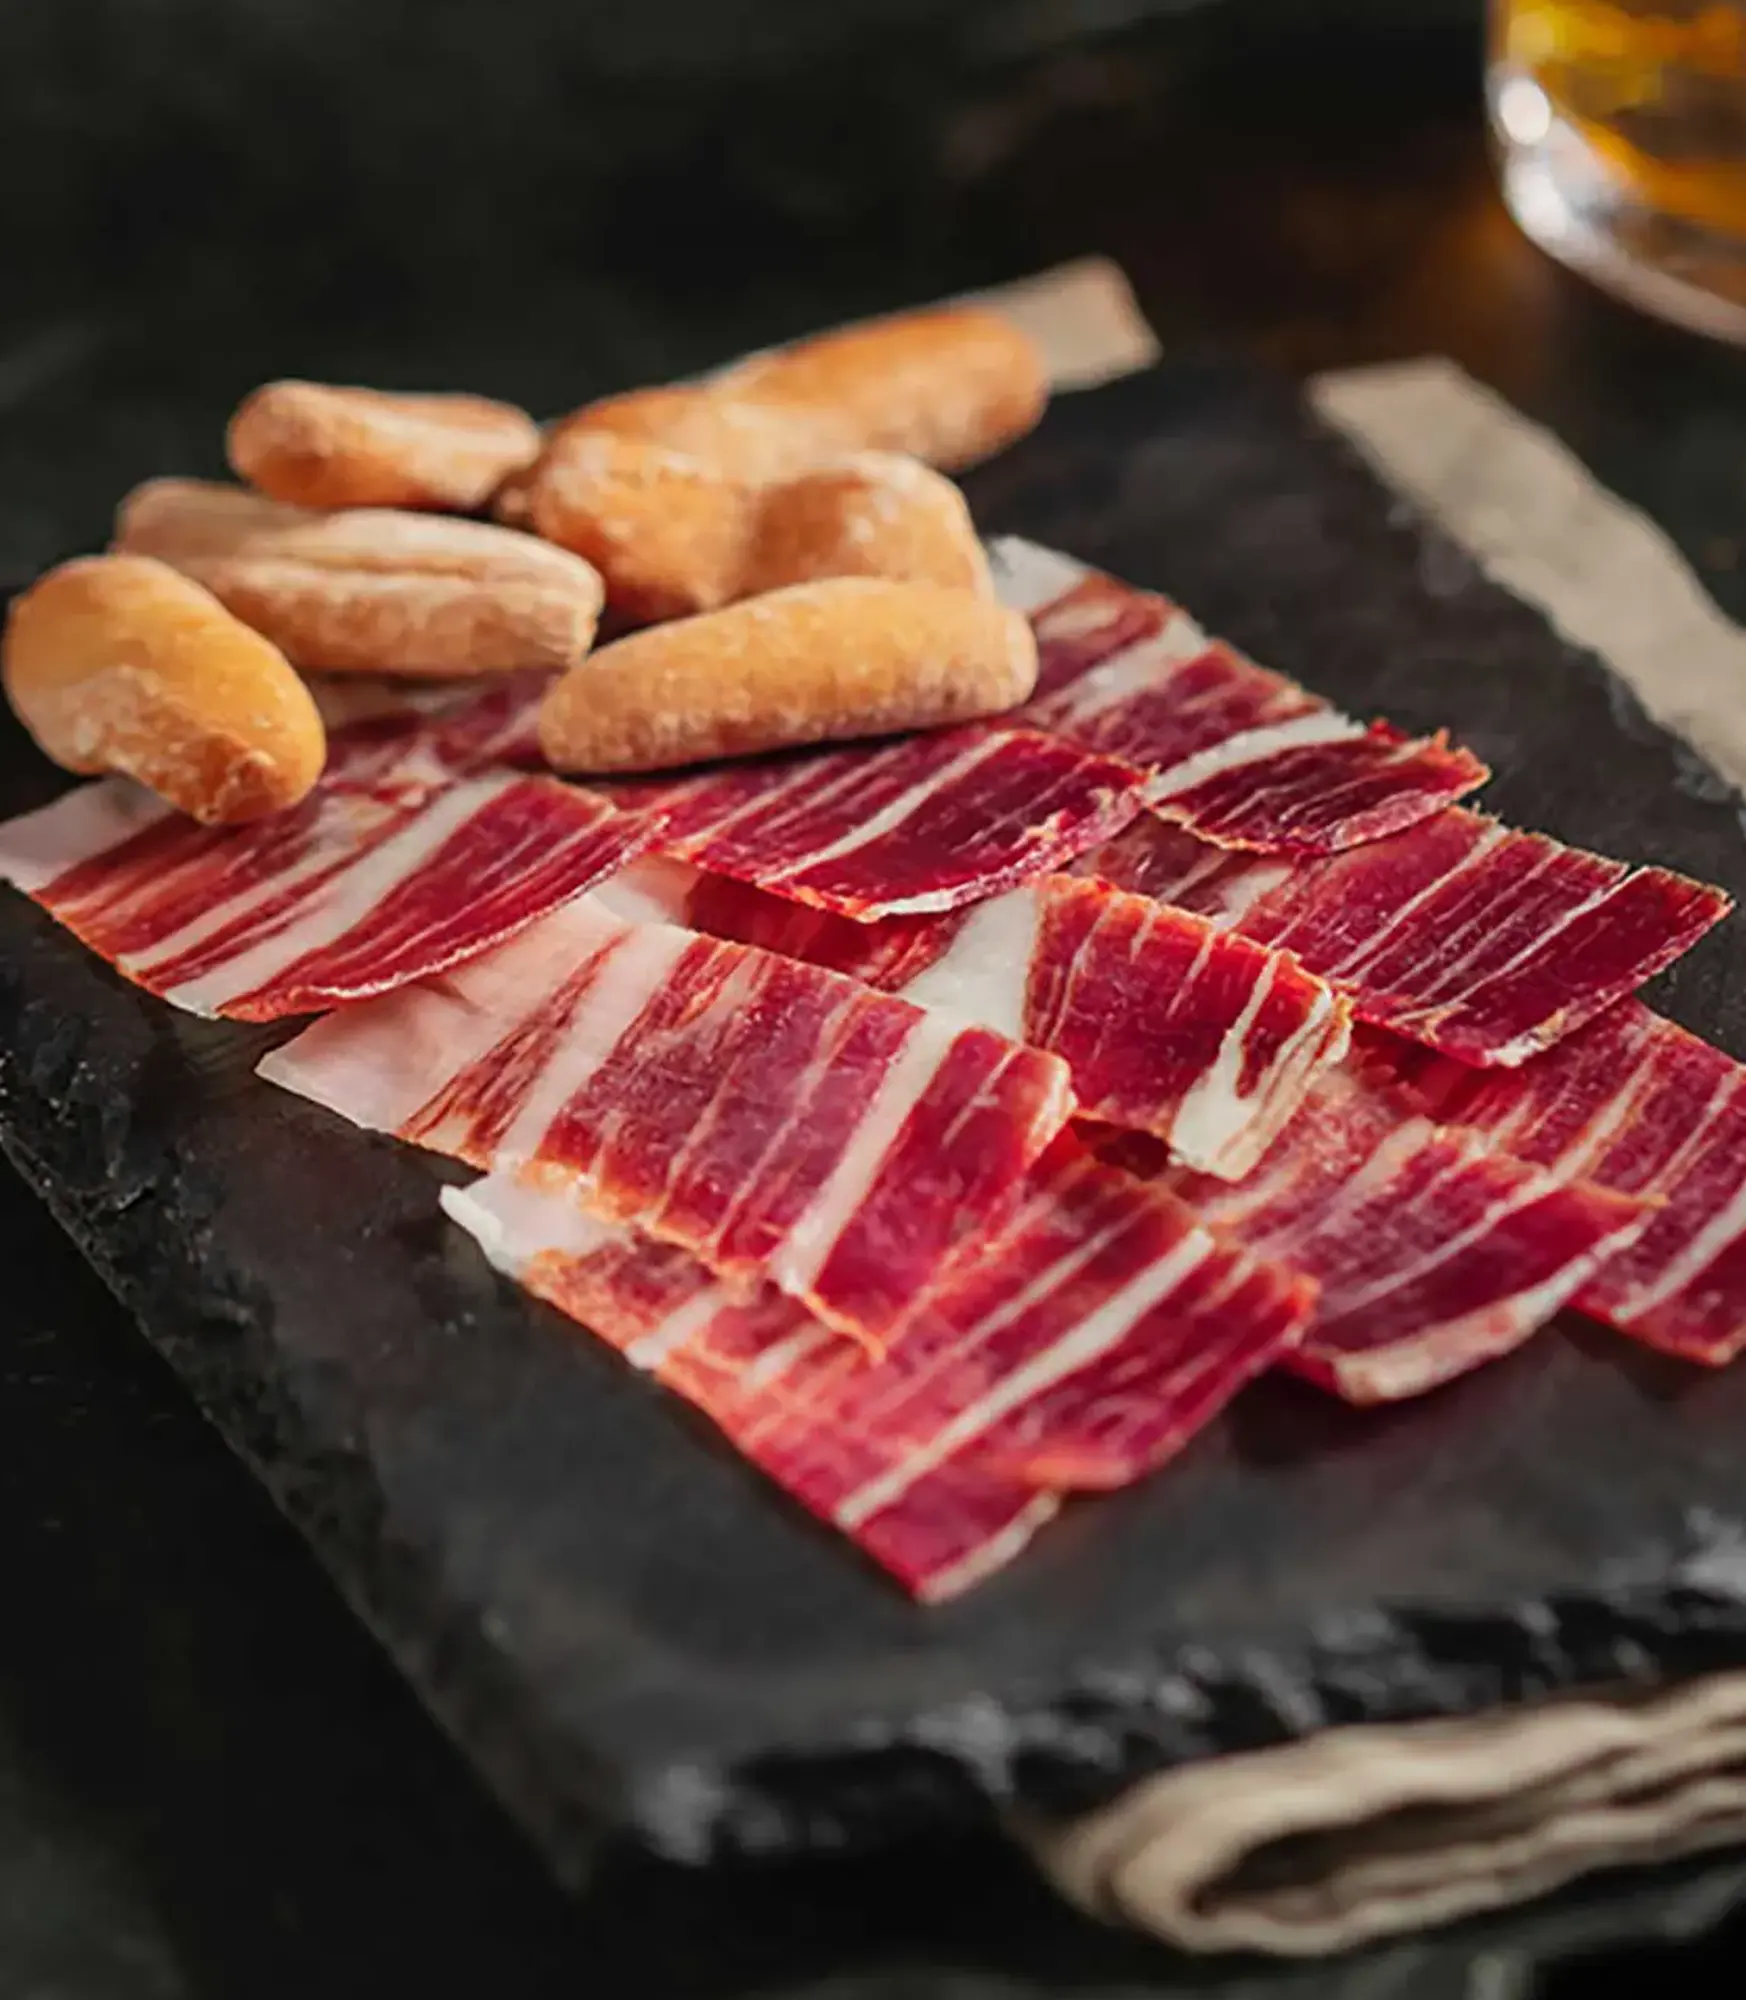 HOW TO PAIR YOUR IBERICO